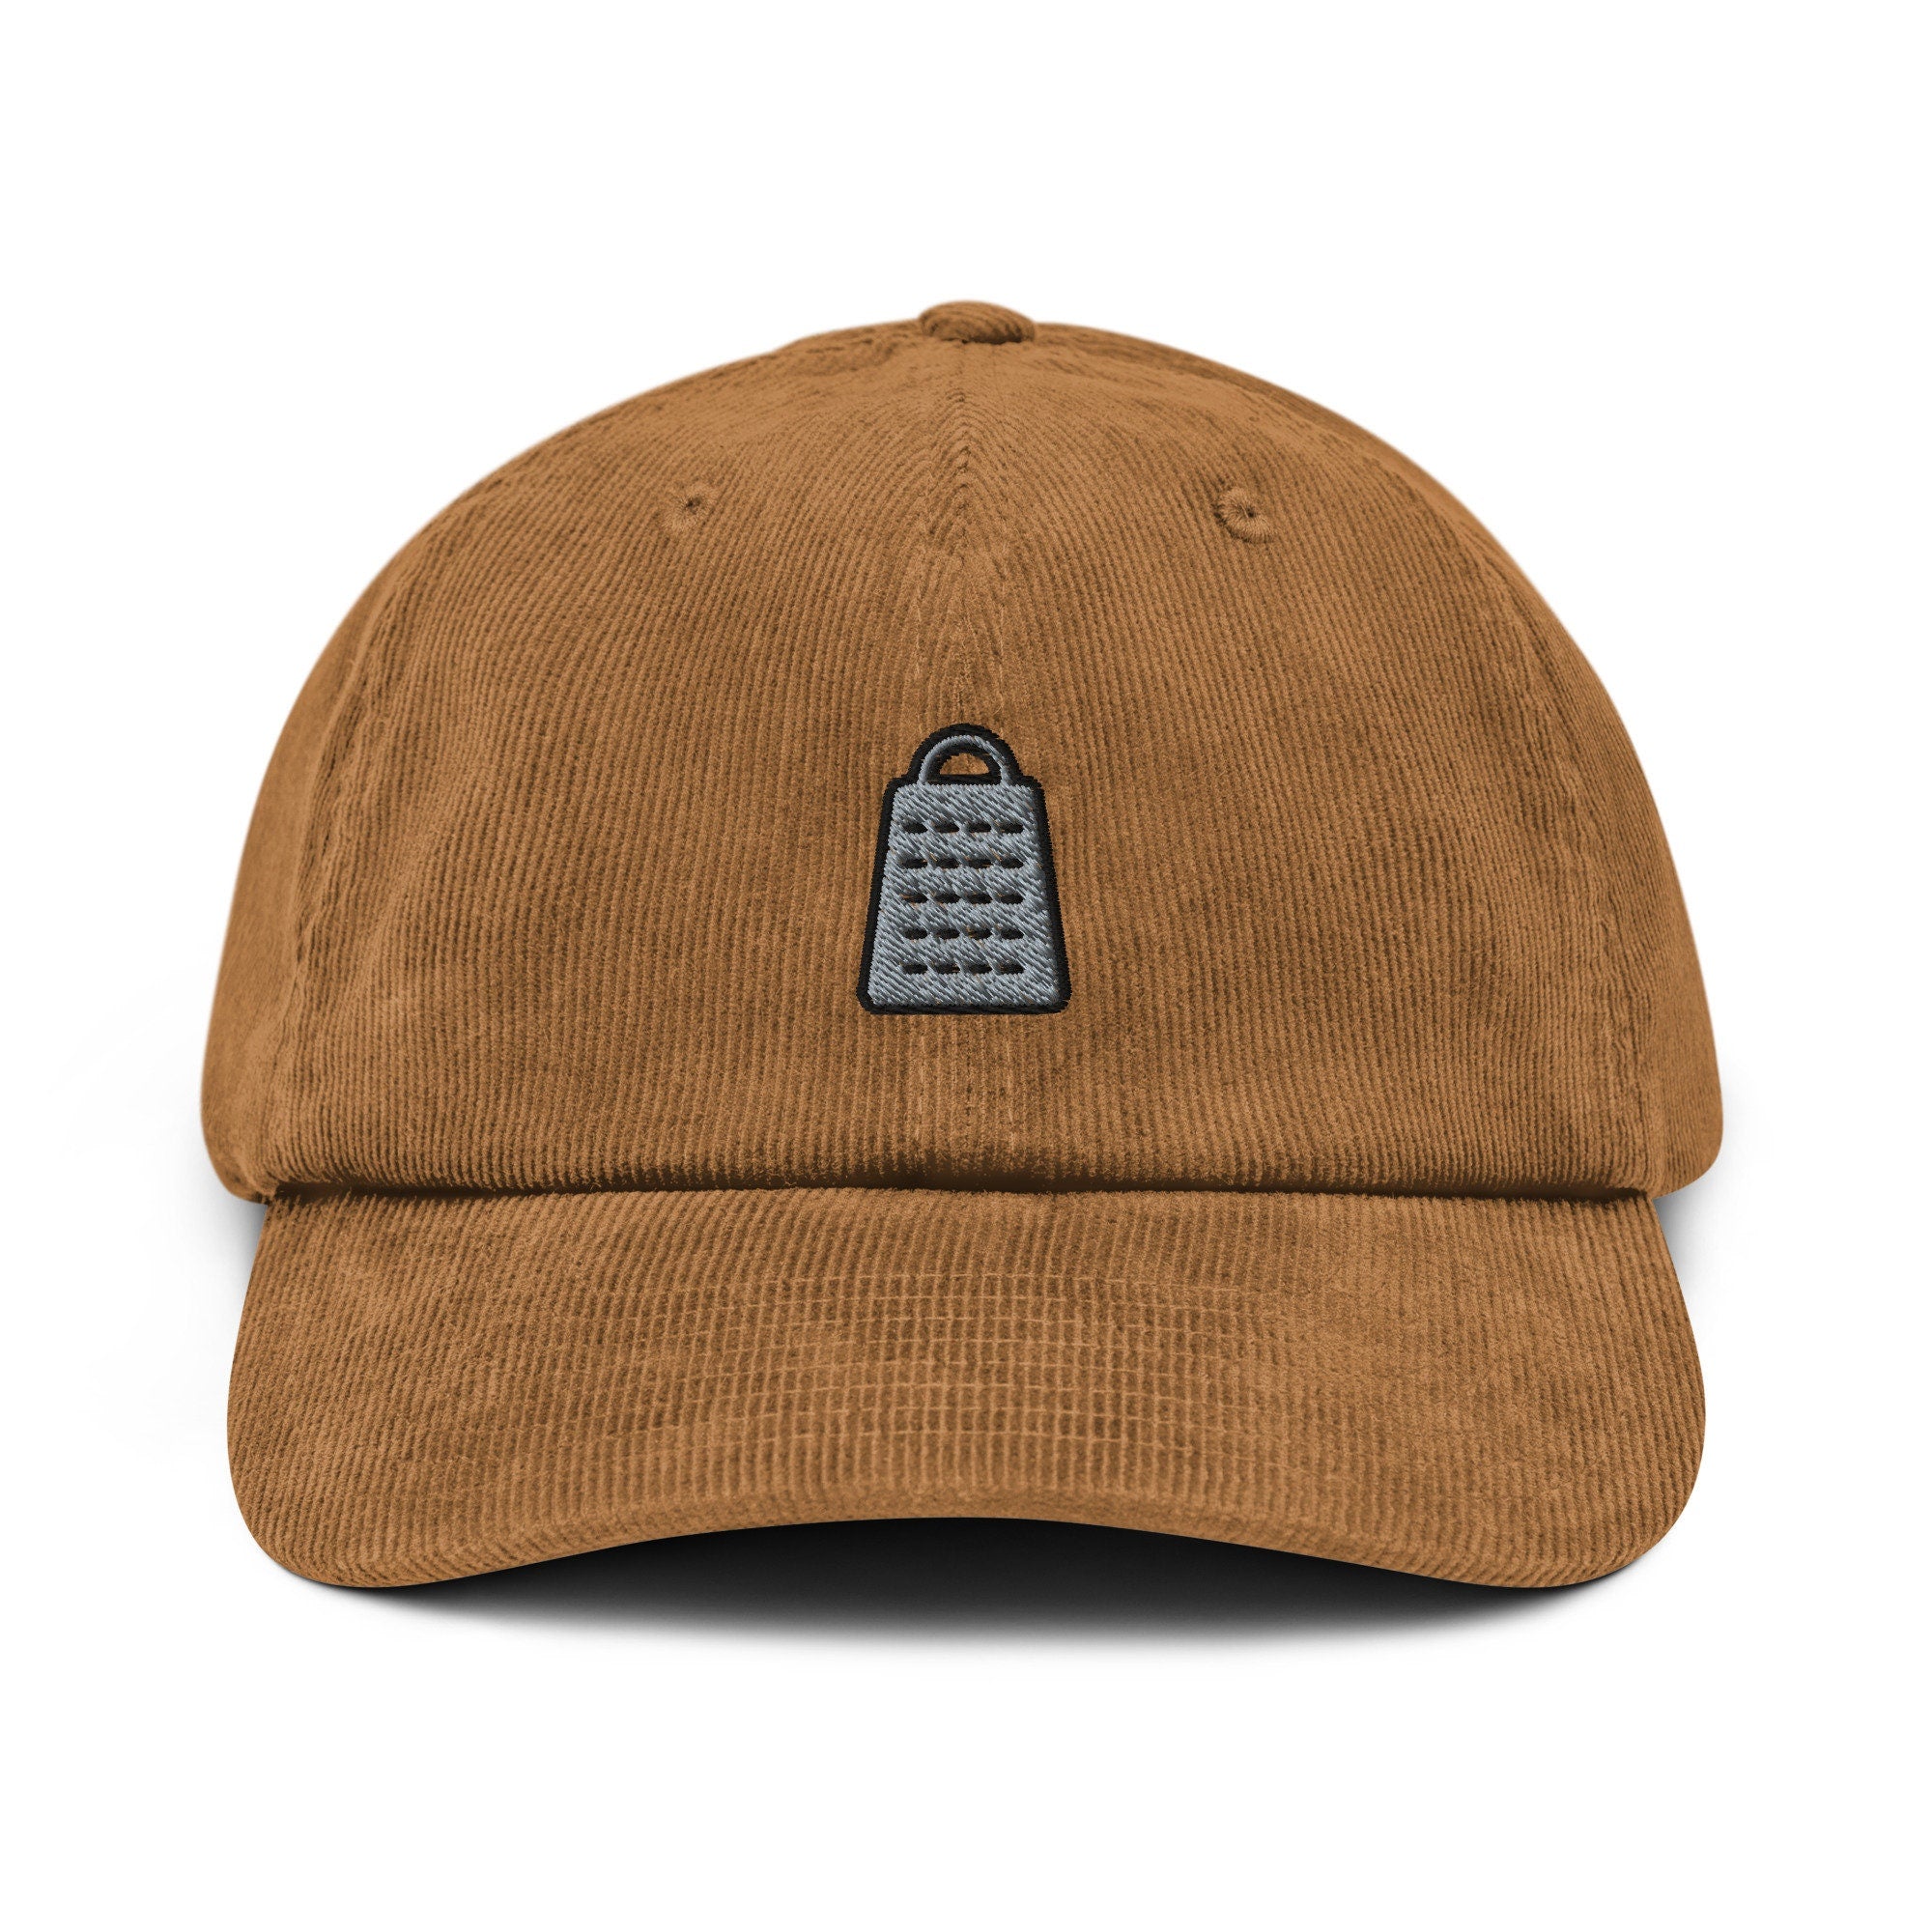 Cheese Grater Corduroy Hat, Handmade Embroidered Corduroy Dad Cap - Multiple Colors